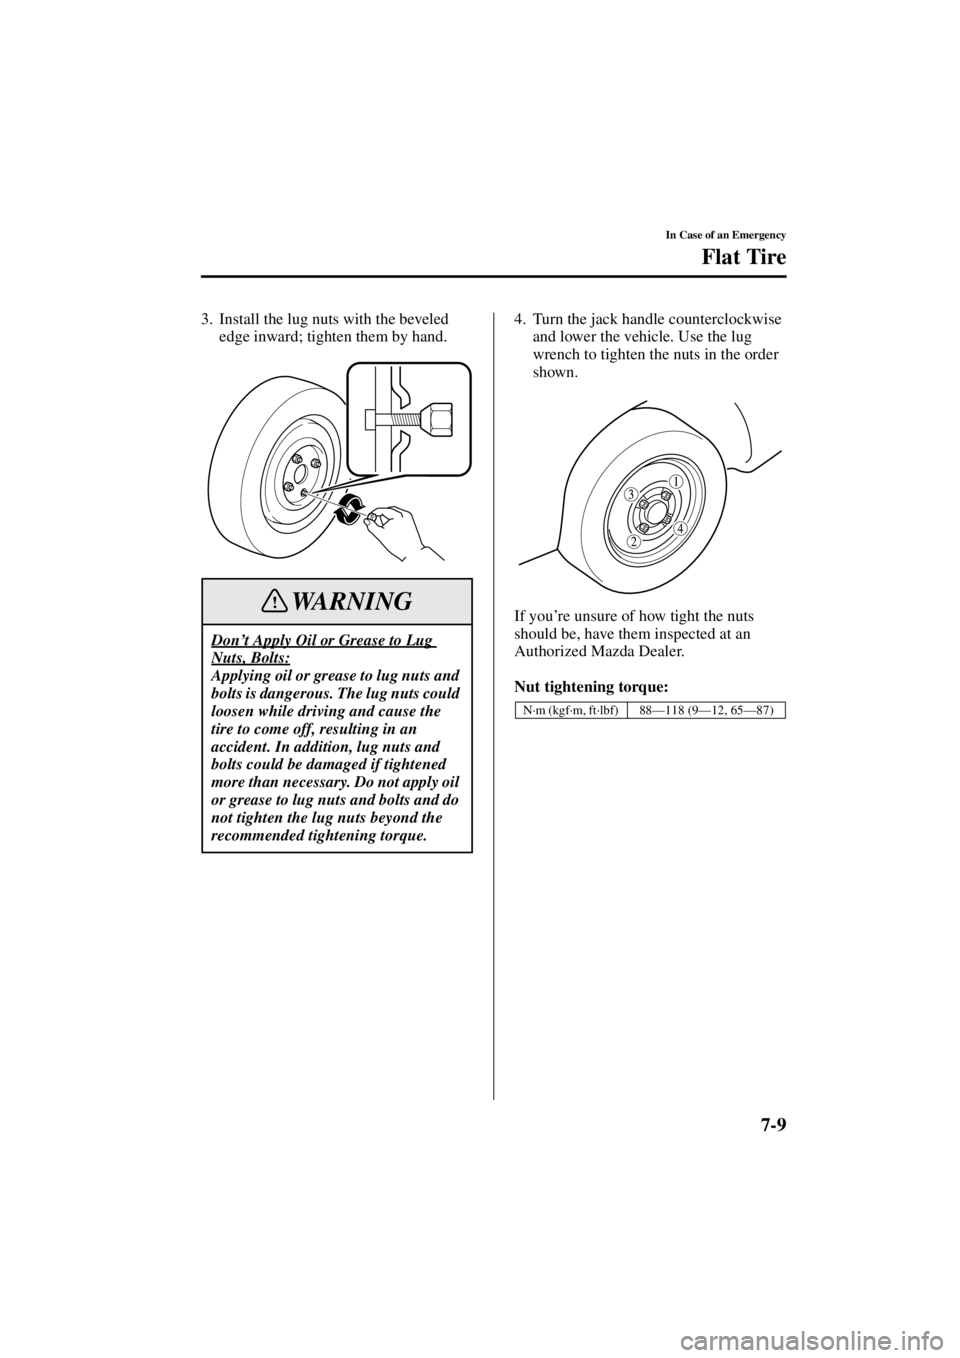 MAZDA MODEL SPEED MX-5 MIATA 2004  Owners Manual 7-9
In Case of an Emergency
Flat Tire
Form No. 8T02-EA-03L
3. Install the lug nuts with the beveled edge inward; tighten them by hand.  4. Turn the jack handle counterclockwise 
and lower the vehicle.